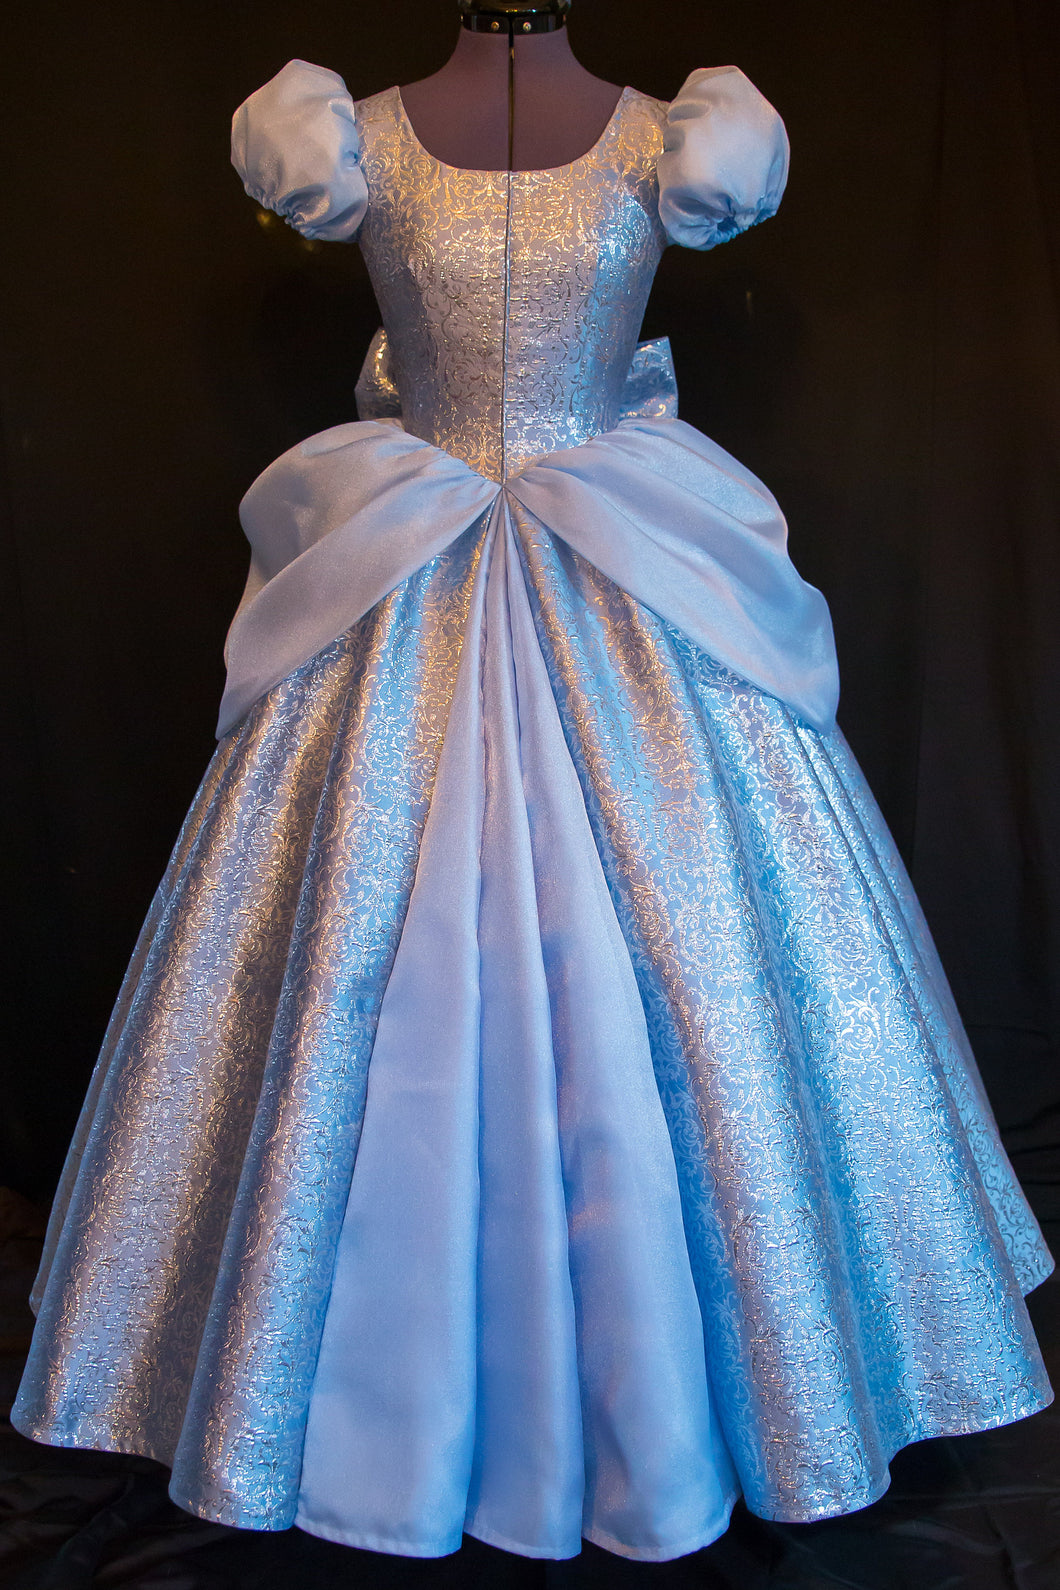 Costume DELUXE Dress Adult Version NEW Fabric Custom Cosplay Costume Cinderella GOWN